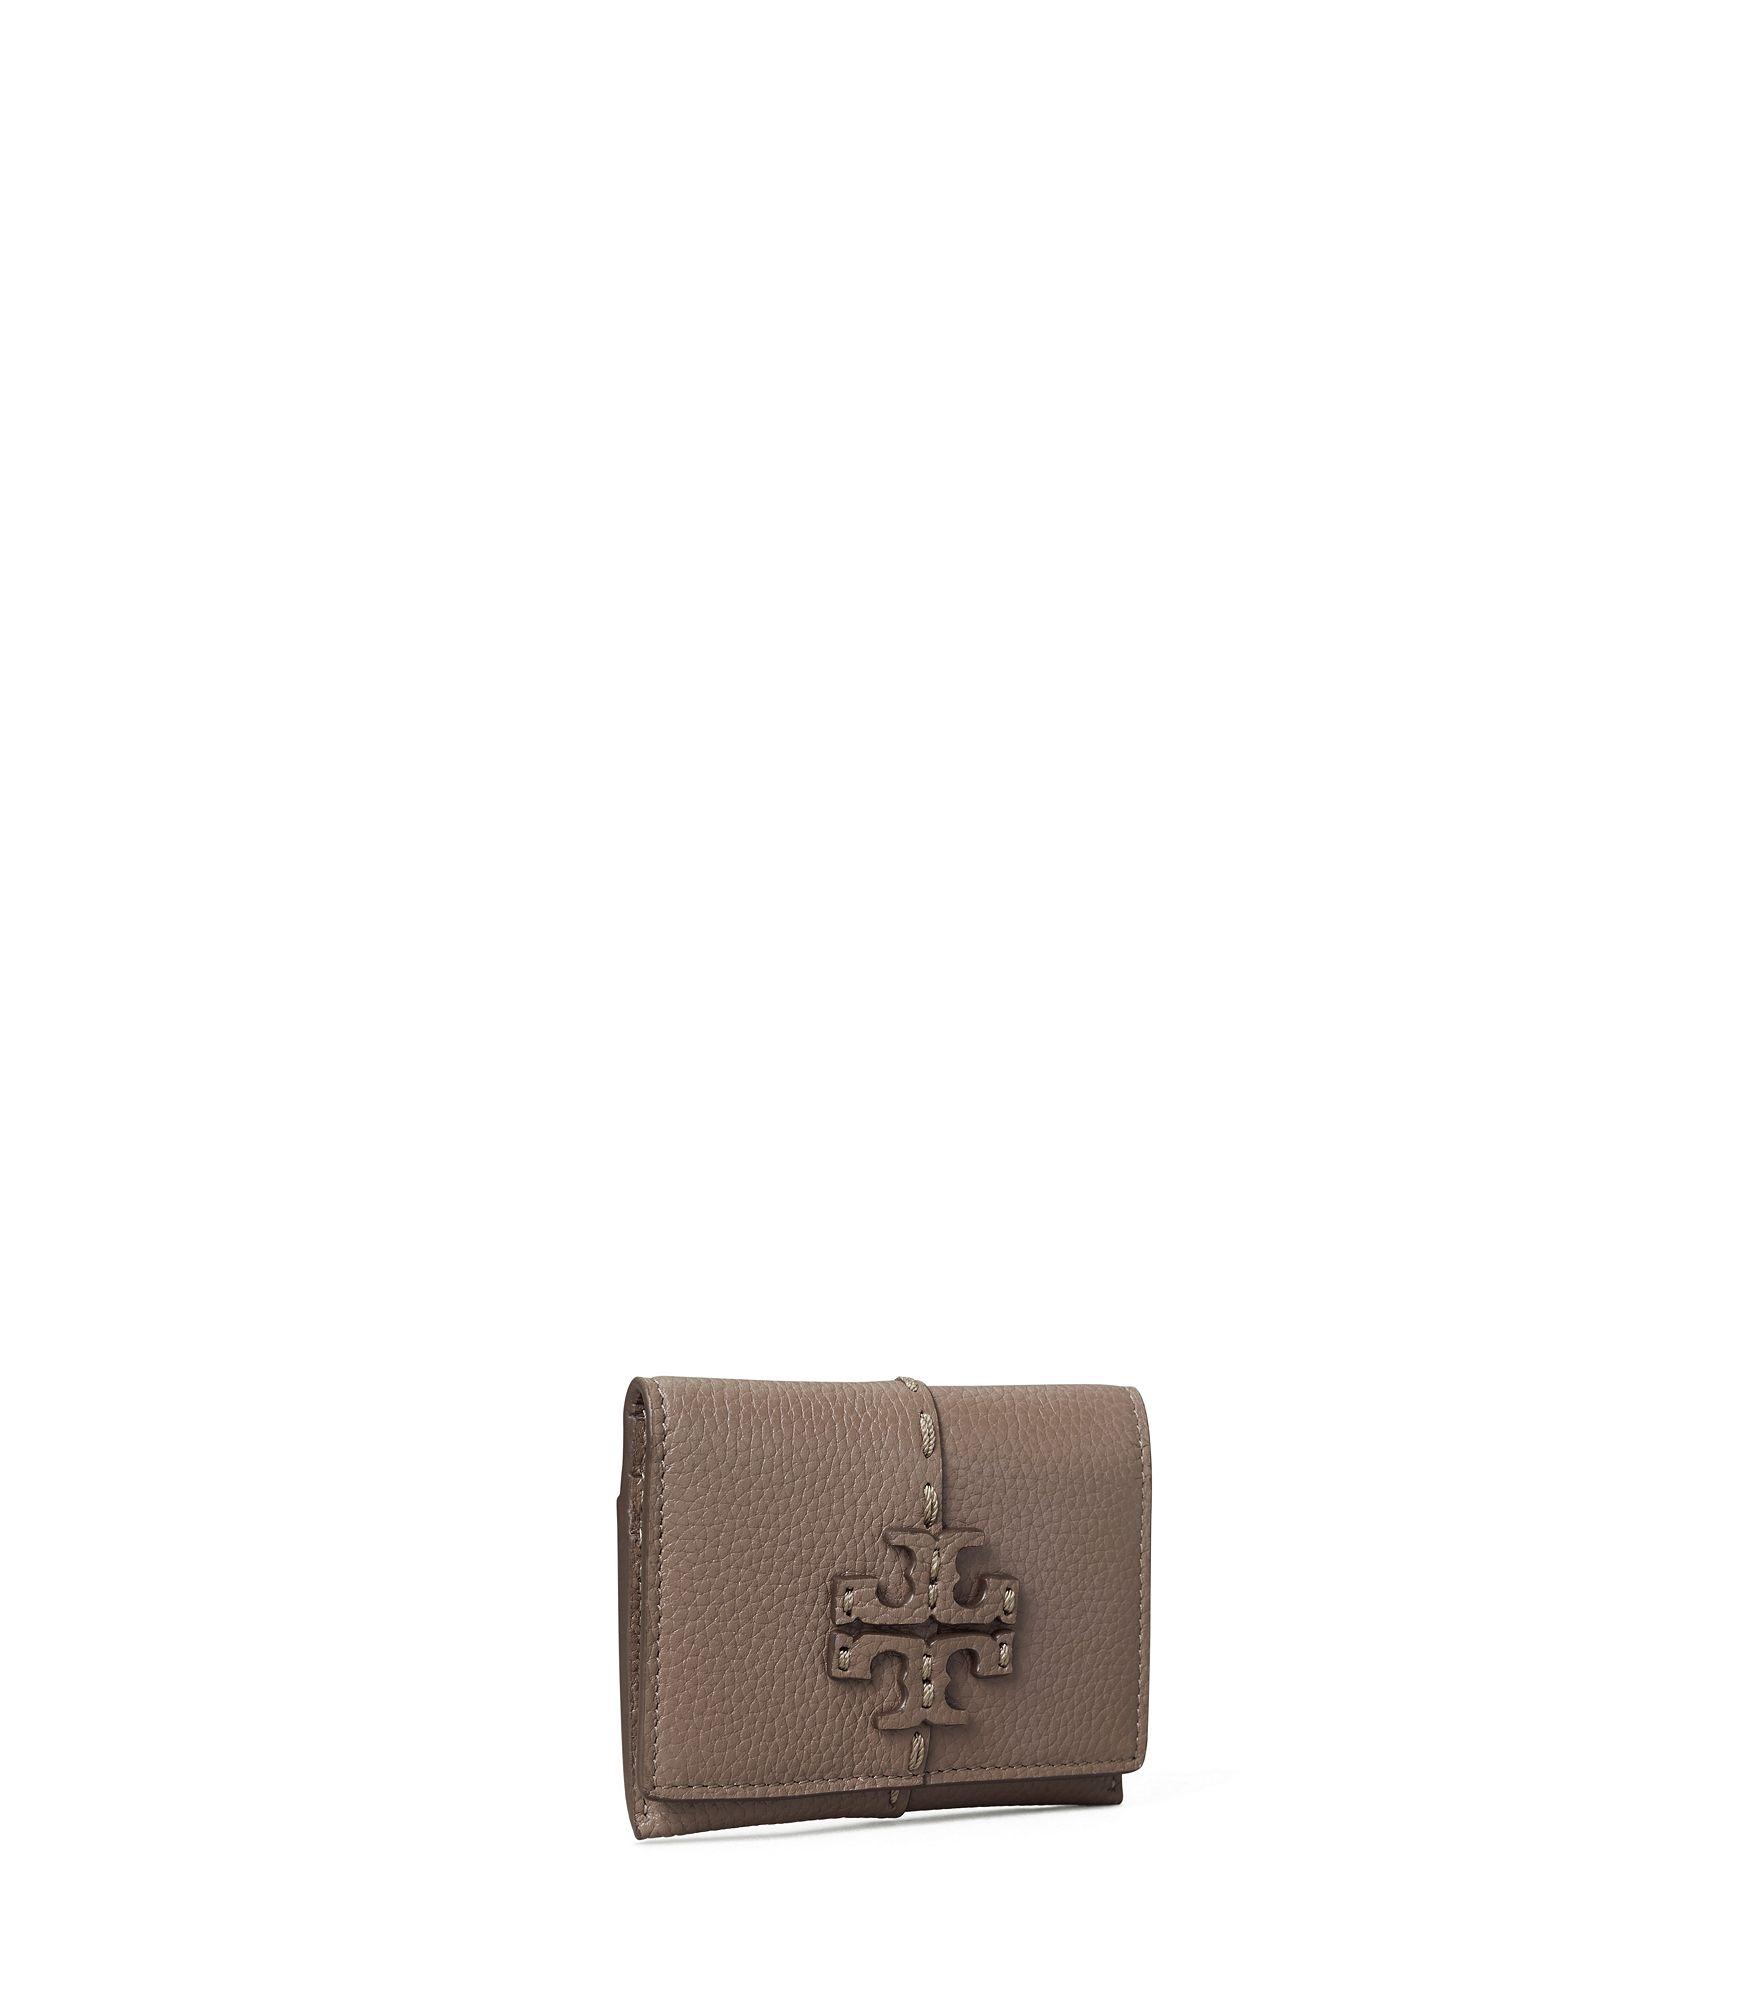 Tory Burch Leather Mcgraw Flap Card Case in Metallic | Lyst